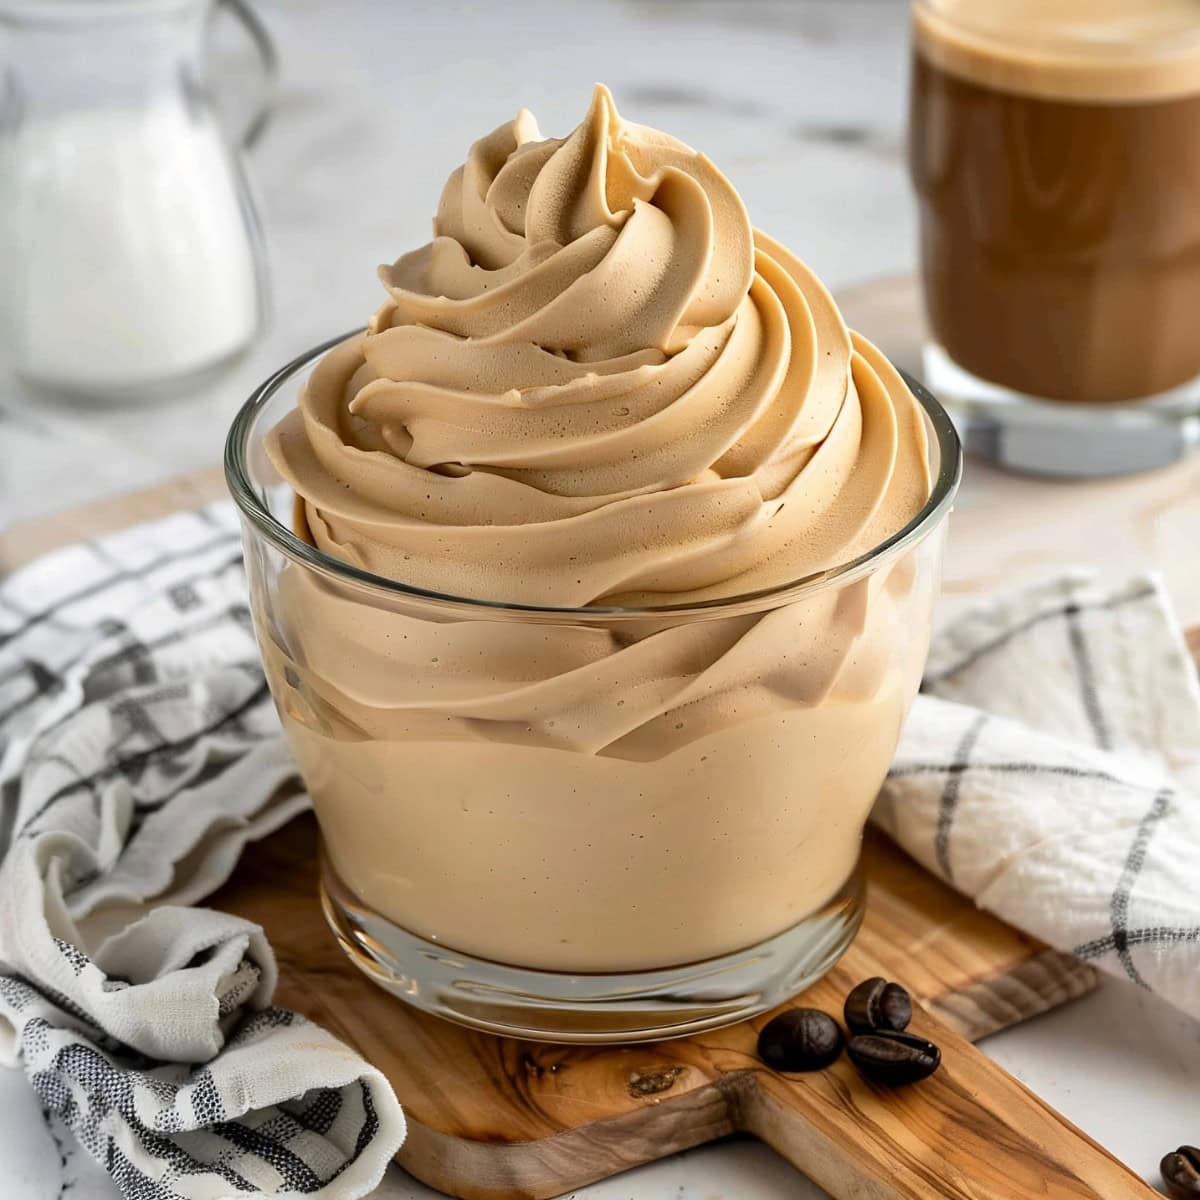 Soft and fluffy coffee whipped cream in a glass bowl, sitting in a wooden board